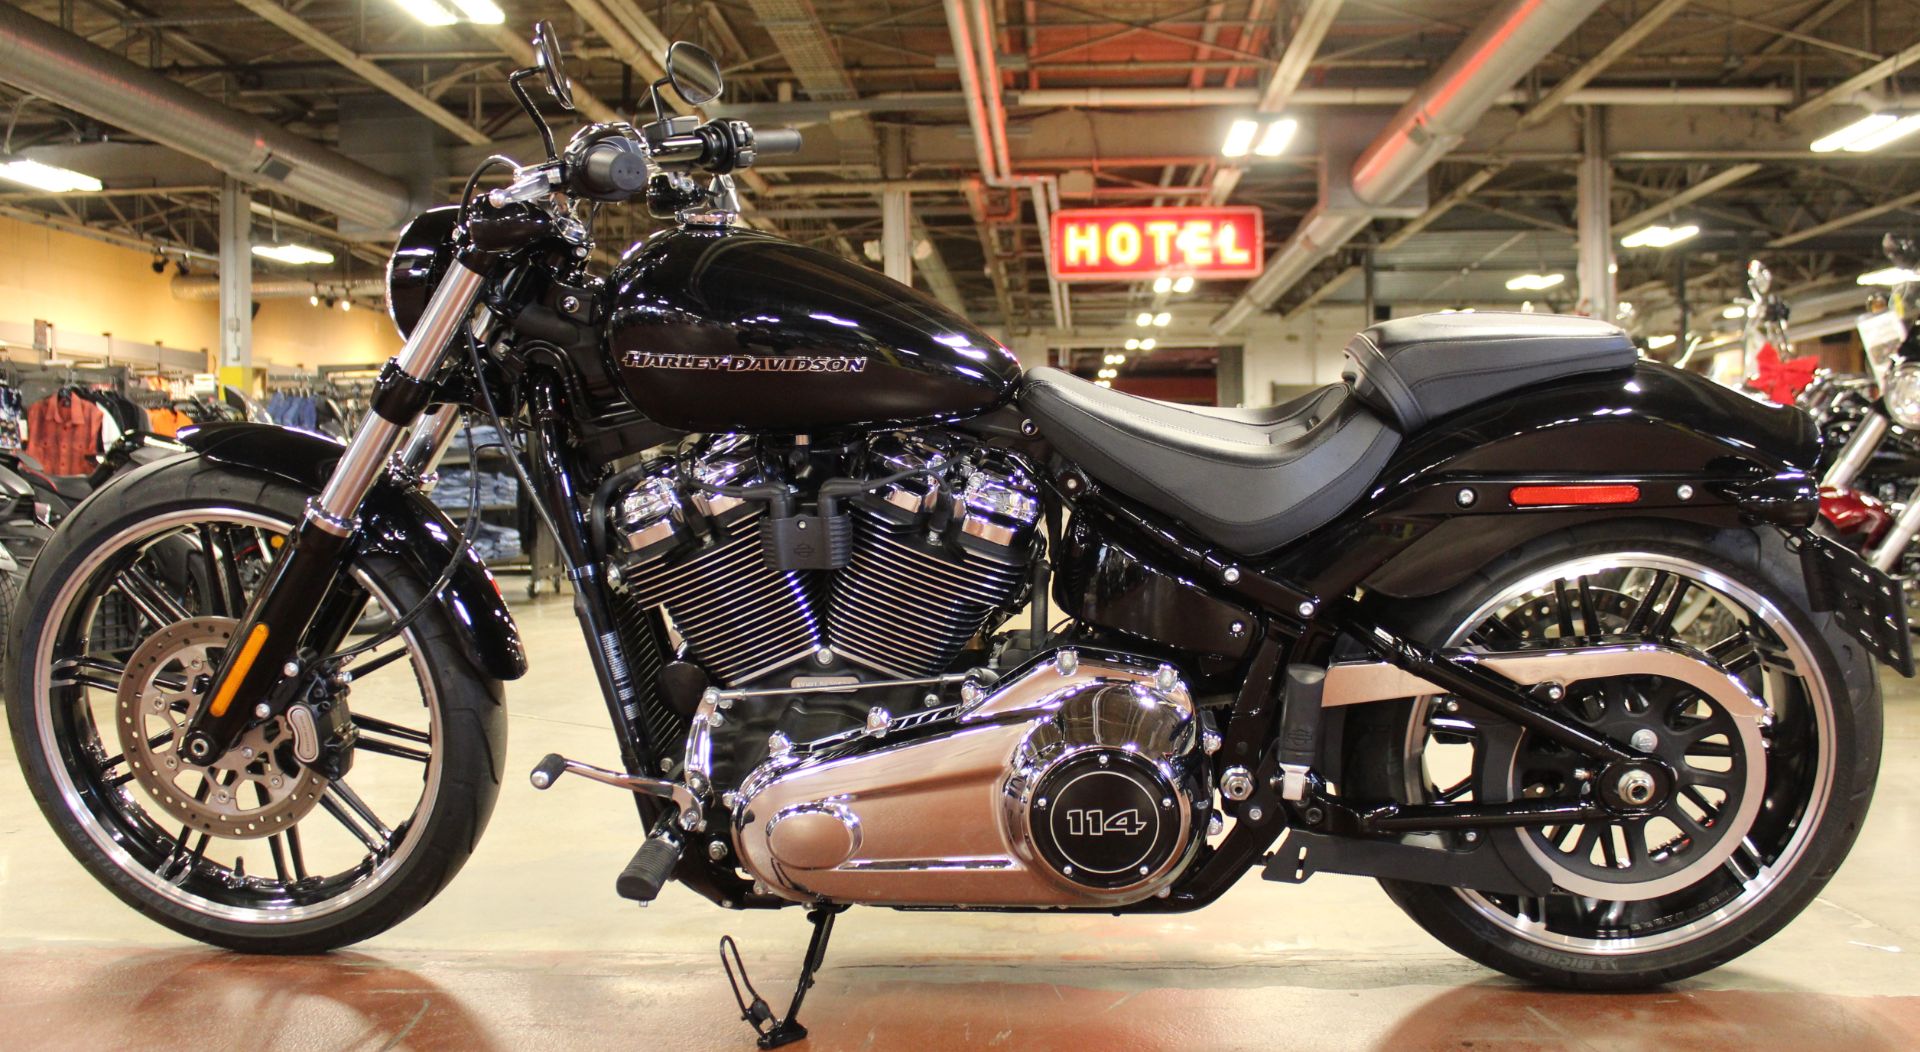 2020 Harley-Davidson Breakout® 114 in New London, Connecticut - Photo 5